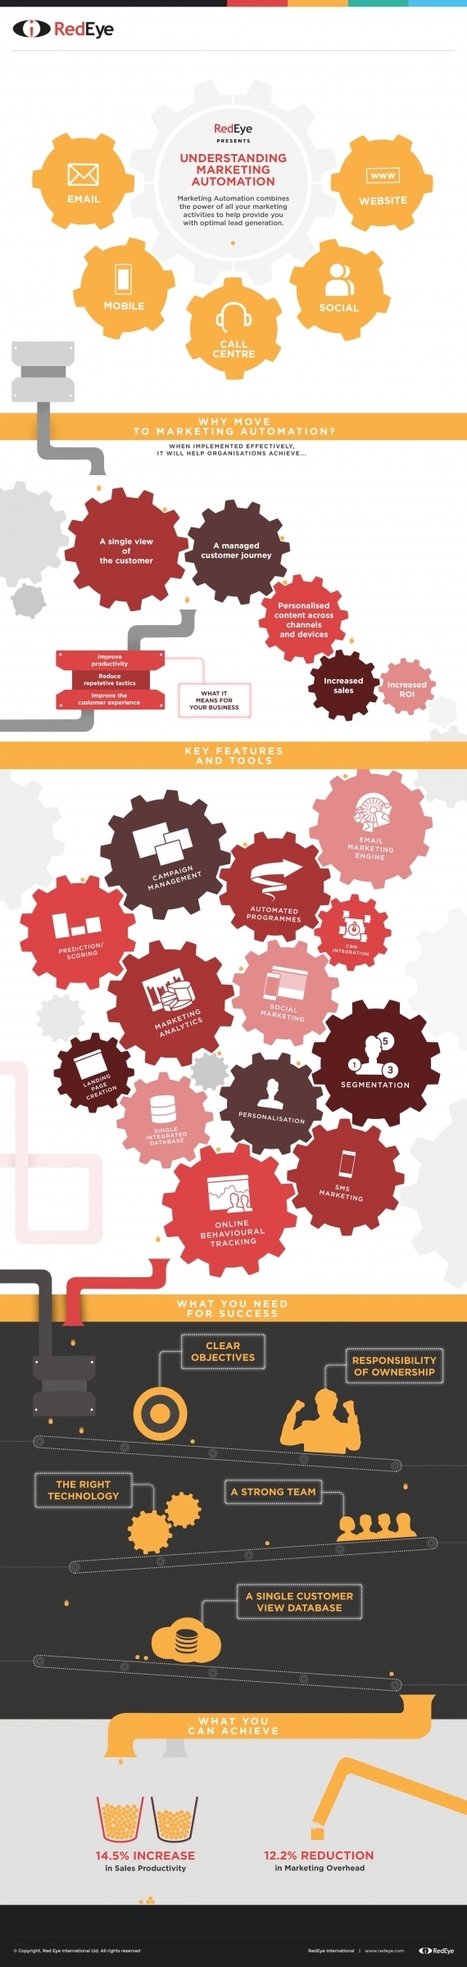 [Infographic] A definition of Marketing Automation for 2014 - SmartInsights | The MarTech Digest | Scoop.it